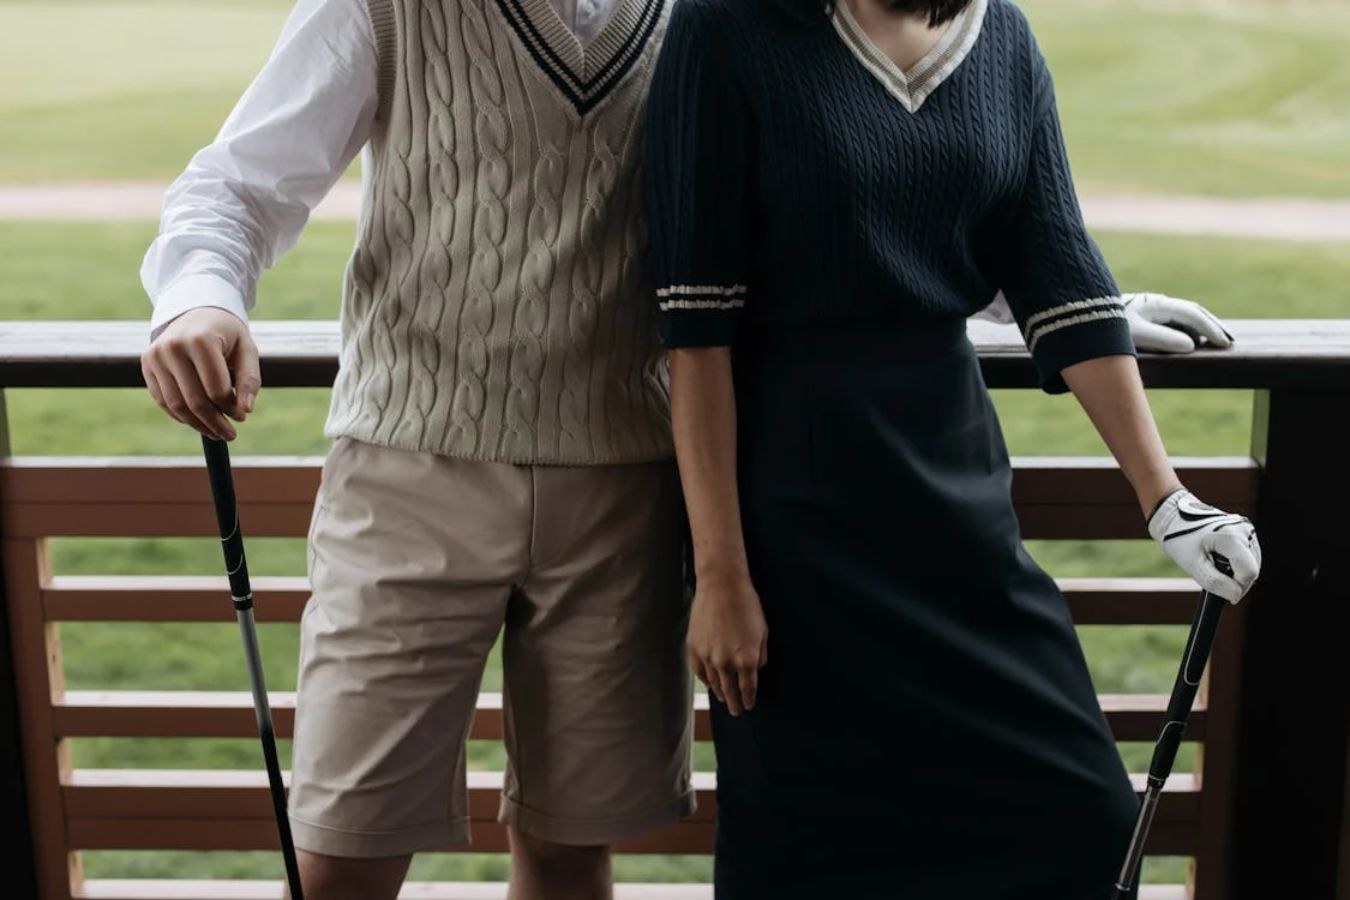 Elegantly-dressed male and female golfers | sweater vests | golf clubs